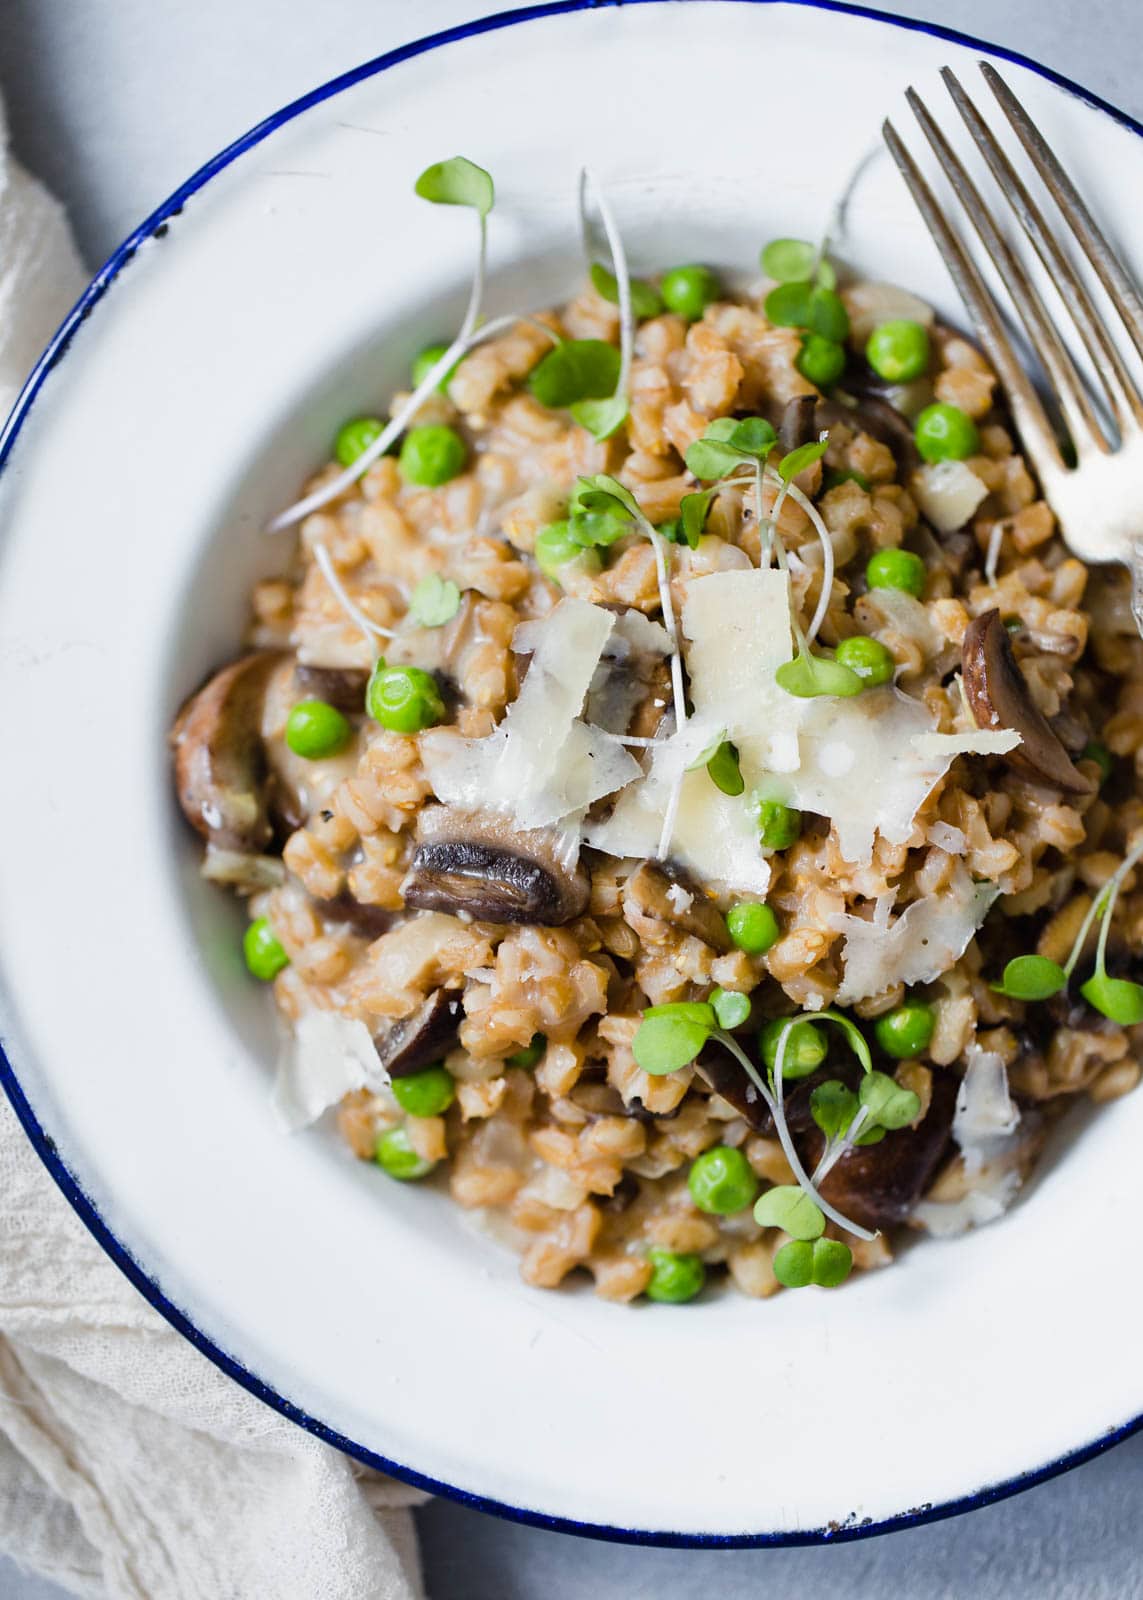 A warm and comforting farro risotto made with fresh spring peas and sautéed mushrooms!